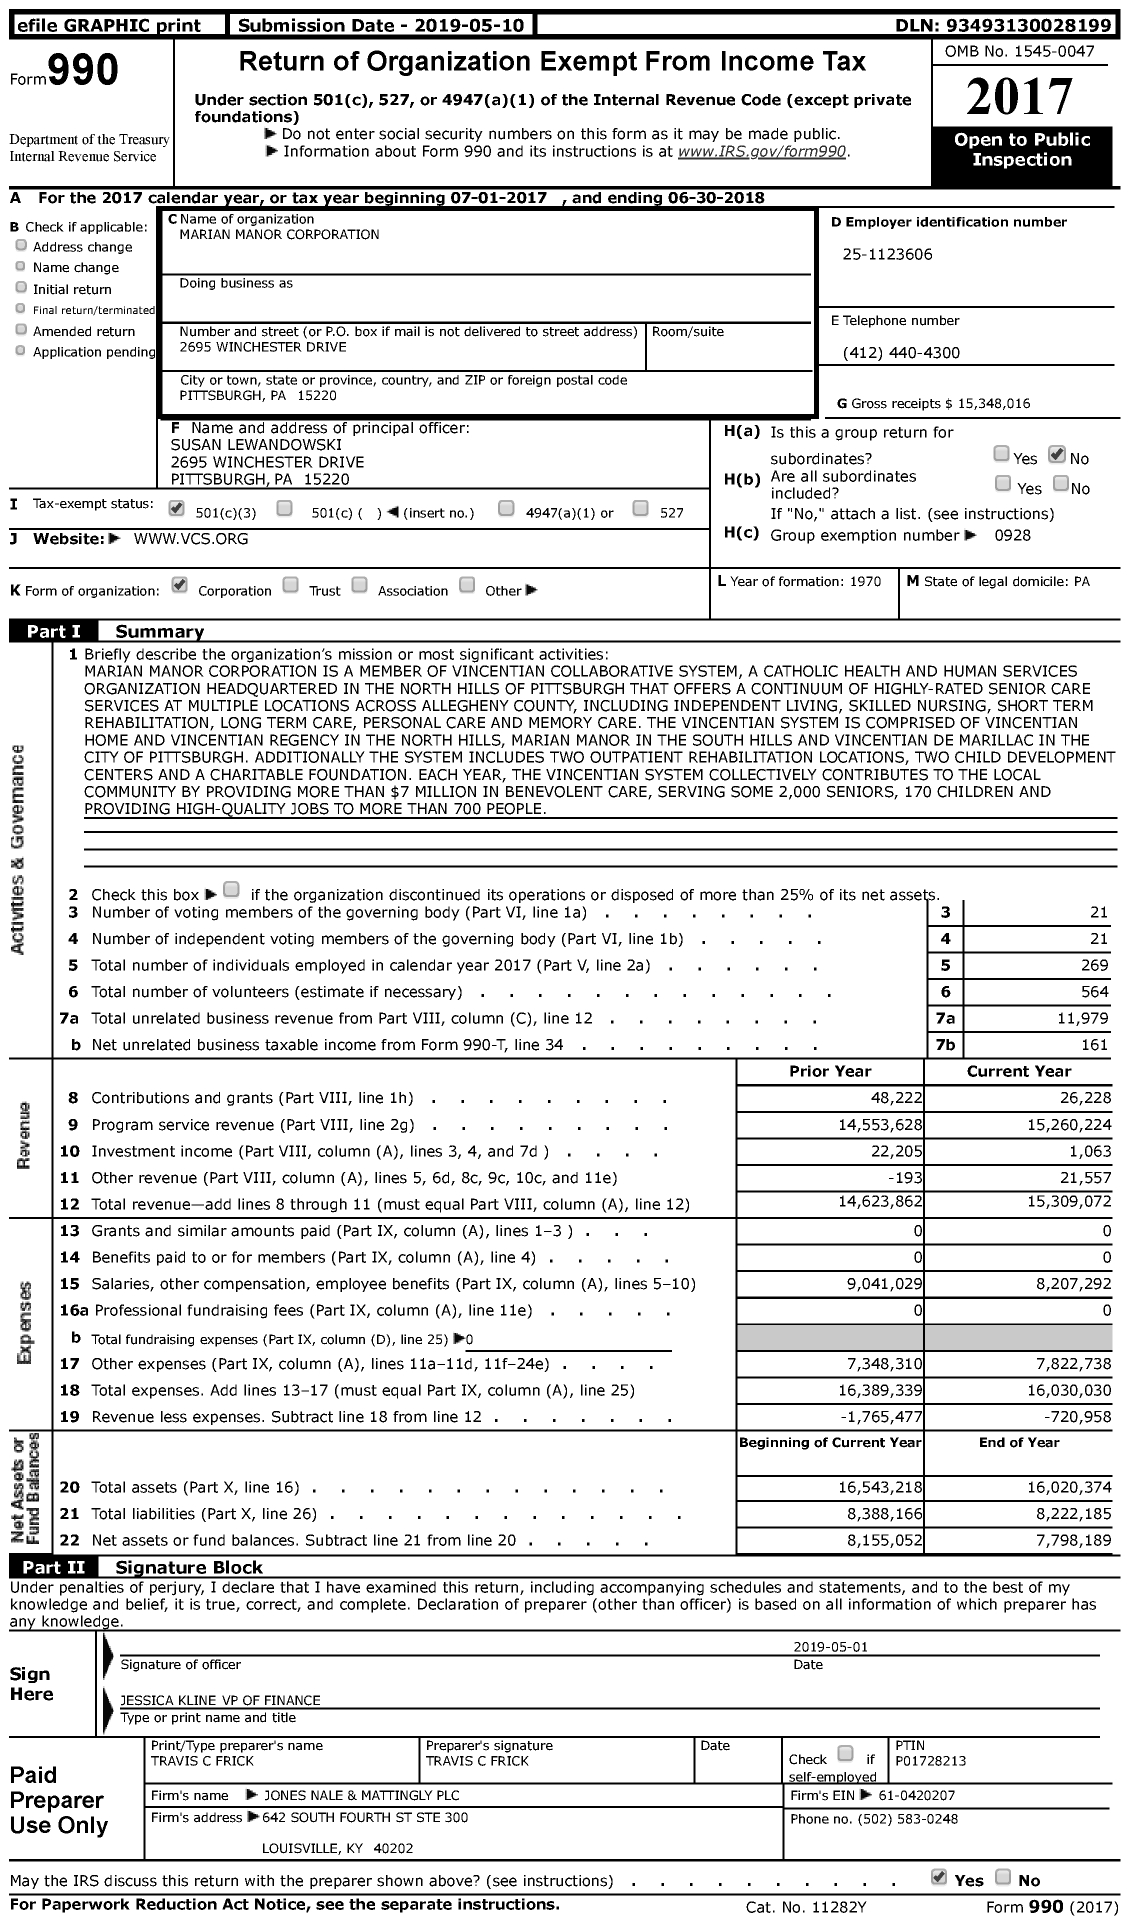 Image of first page of 2017 Form 990 for Marian Manor Corporation